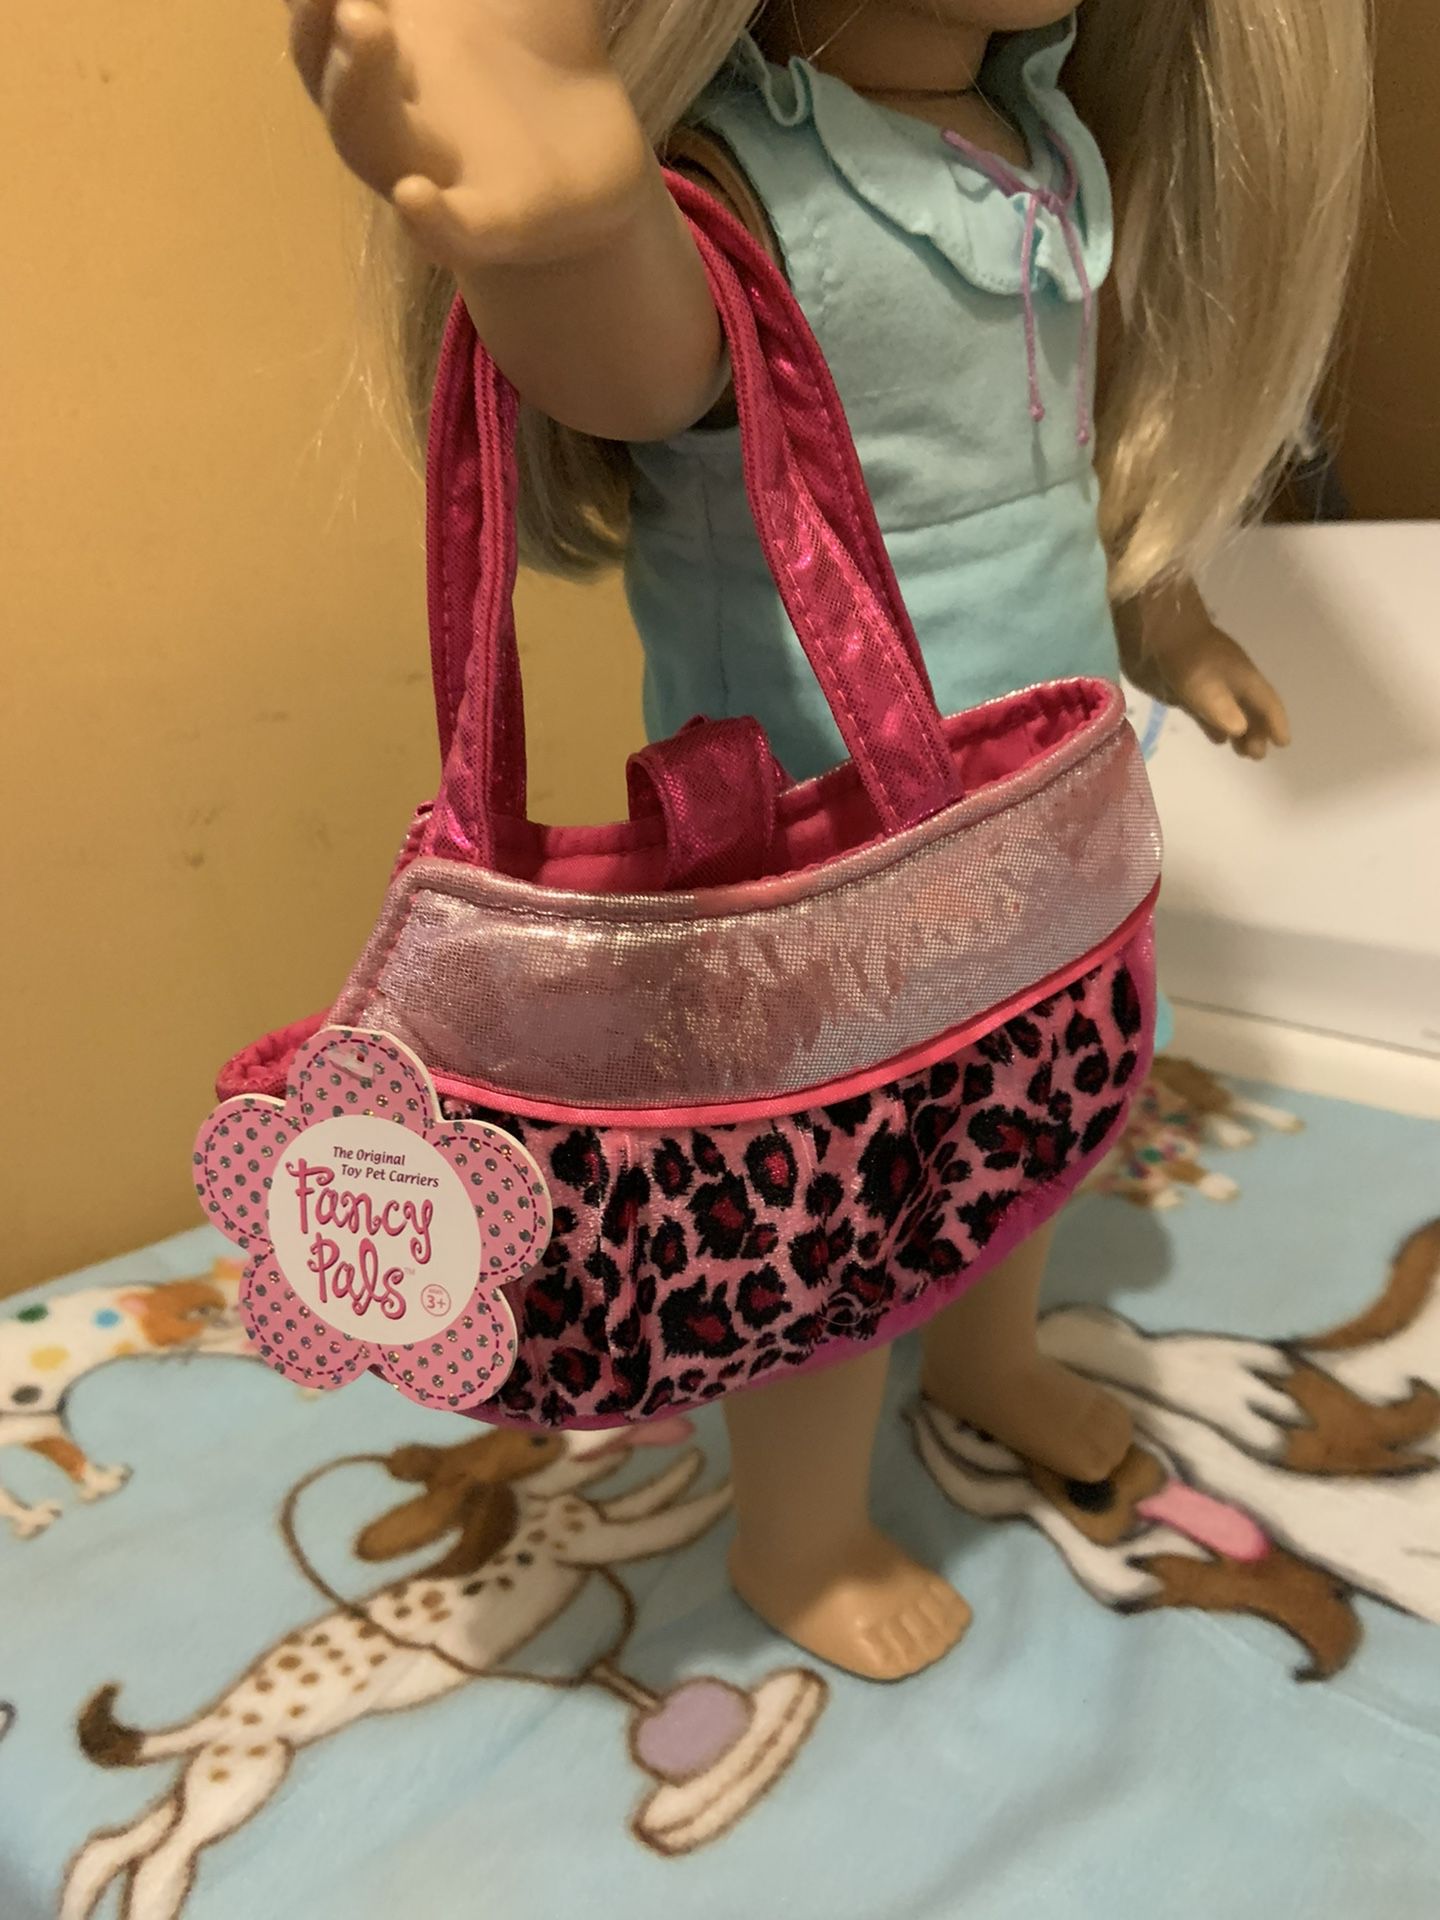 Toy Pet Carrier For An 18” Doll